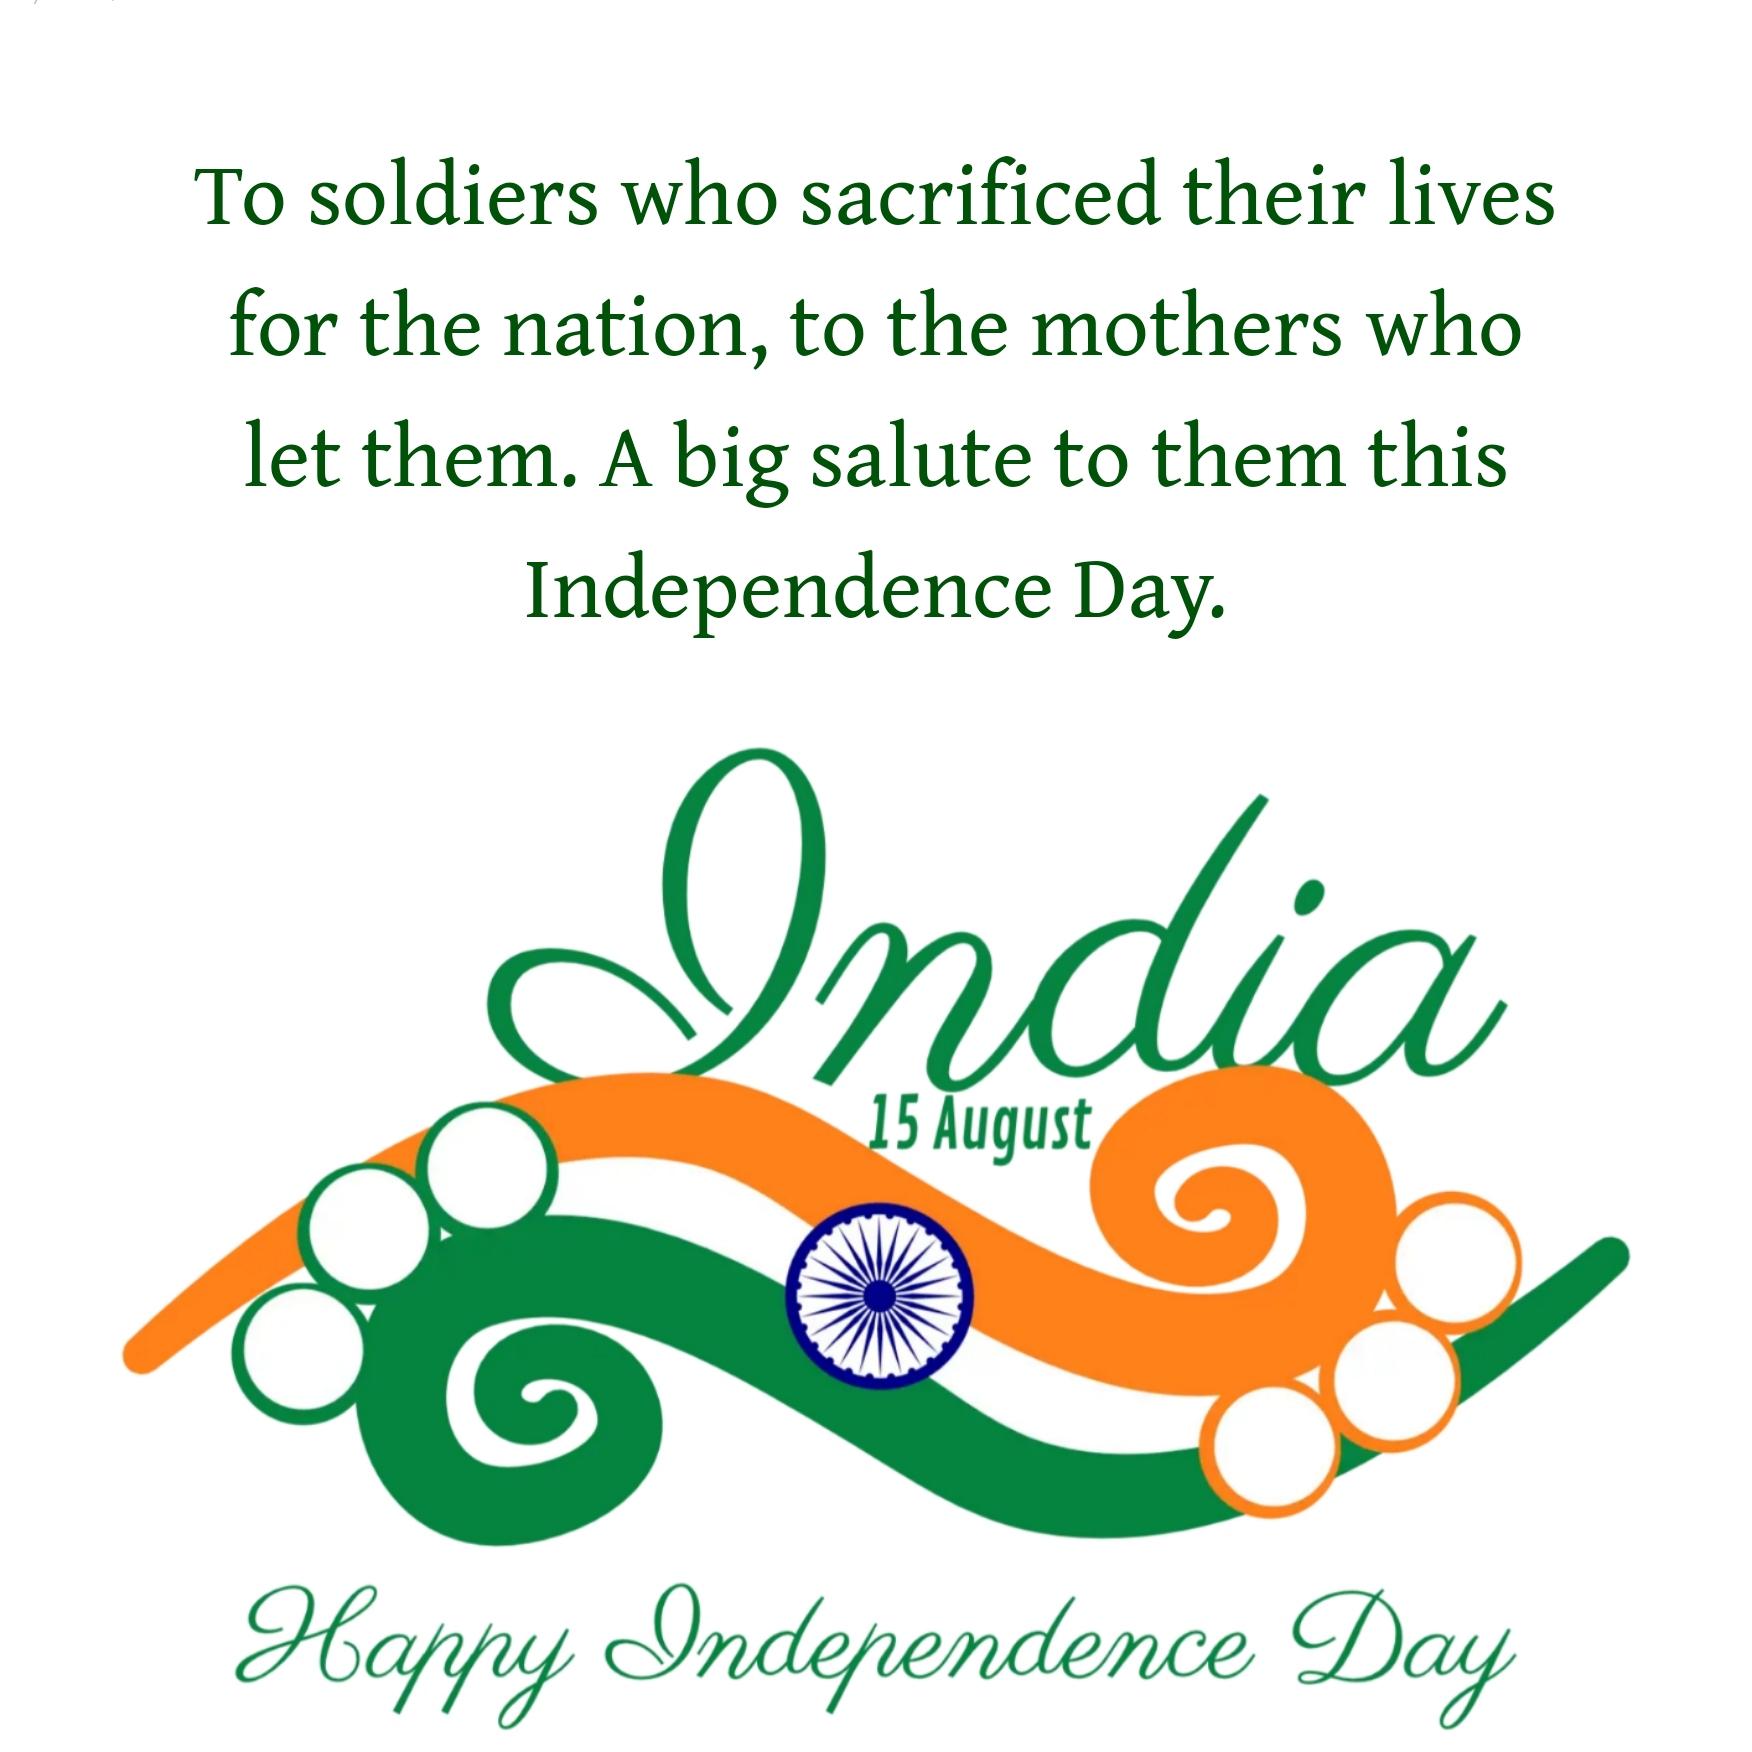 To soldiers who sacrificed their lives for the nation